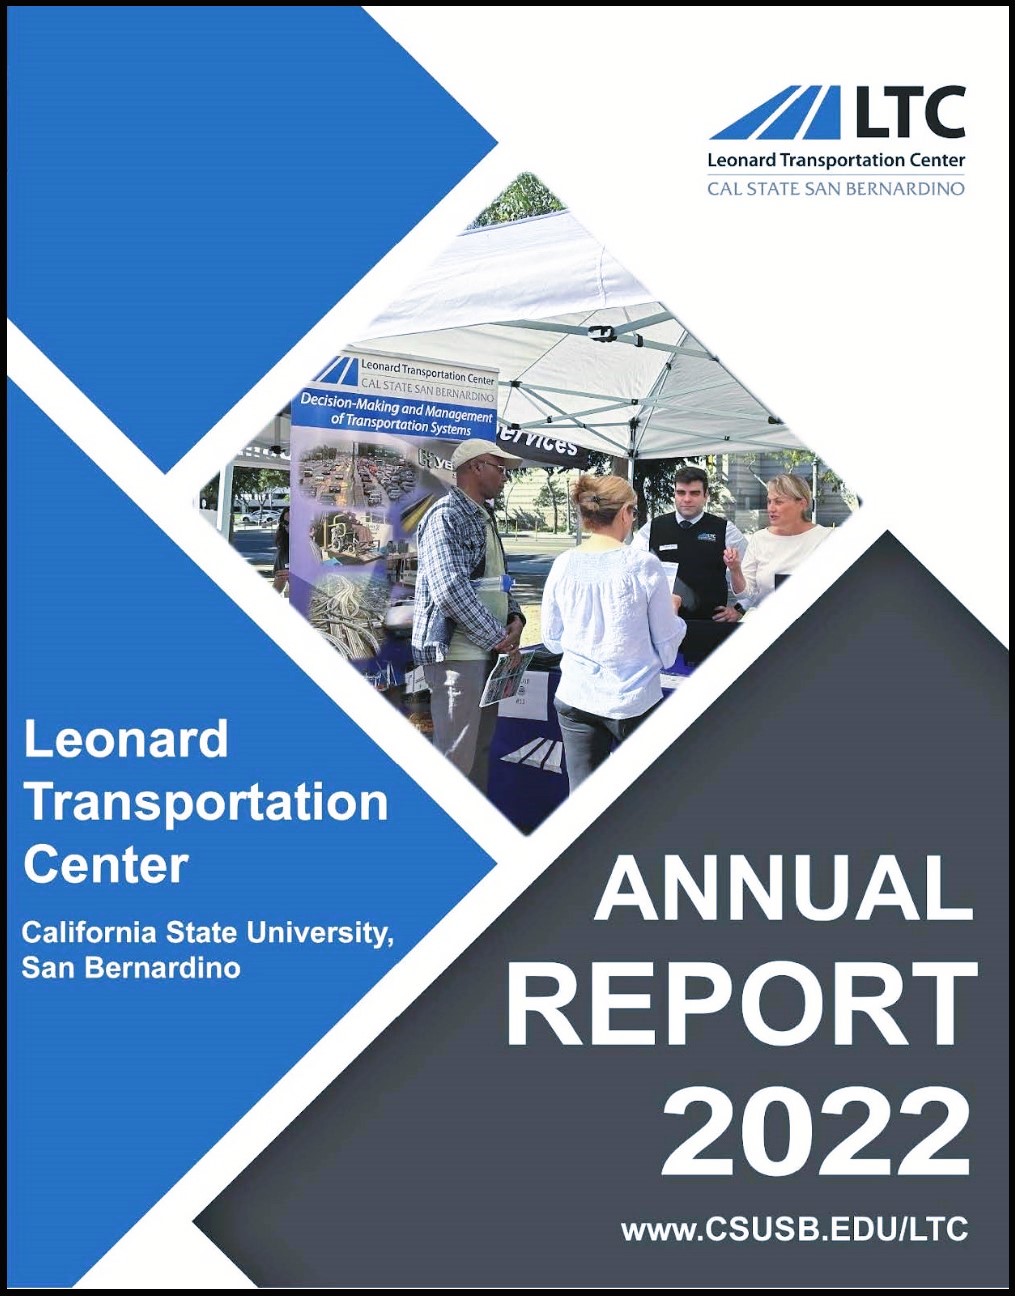 Annual Report 2022 -1 Cover 300x388 with border (for website)